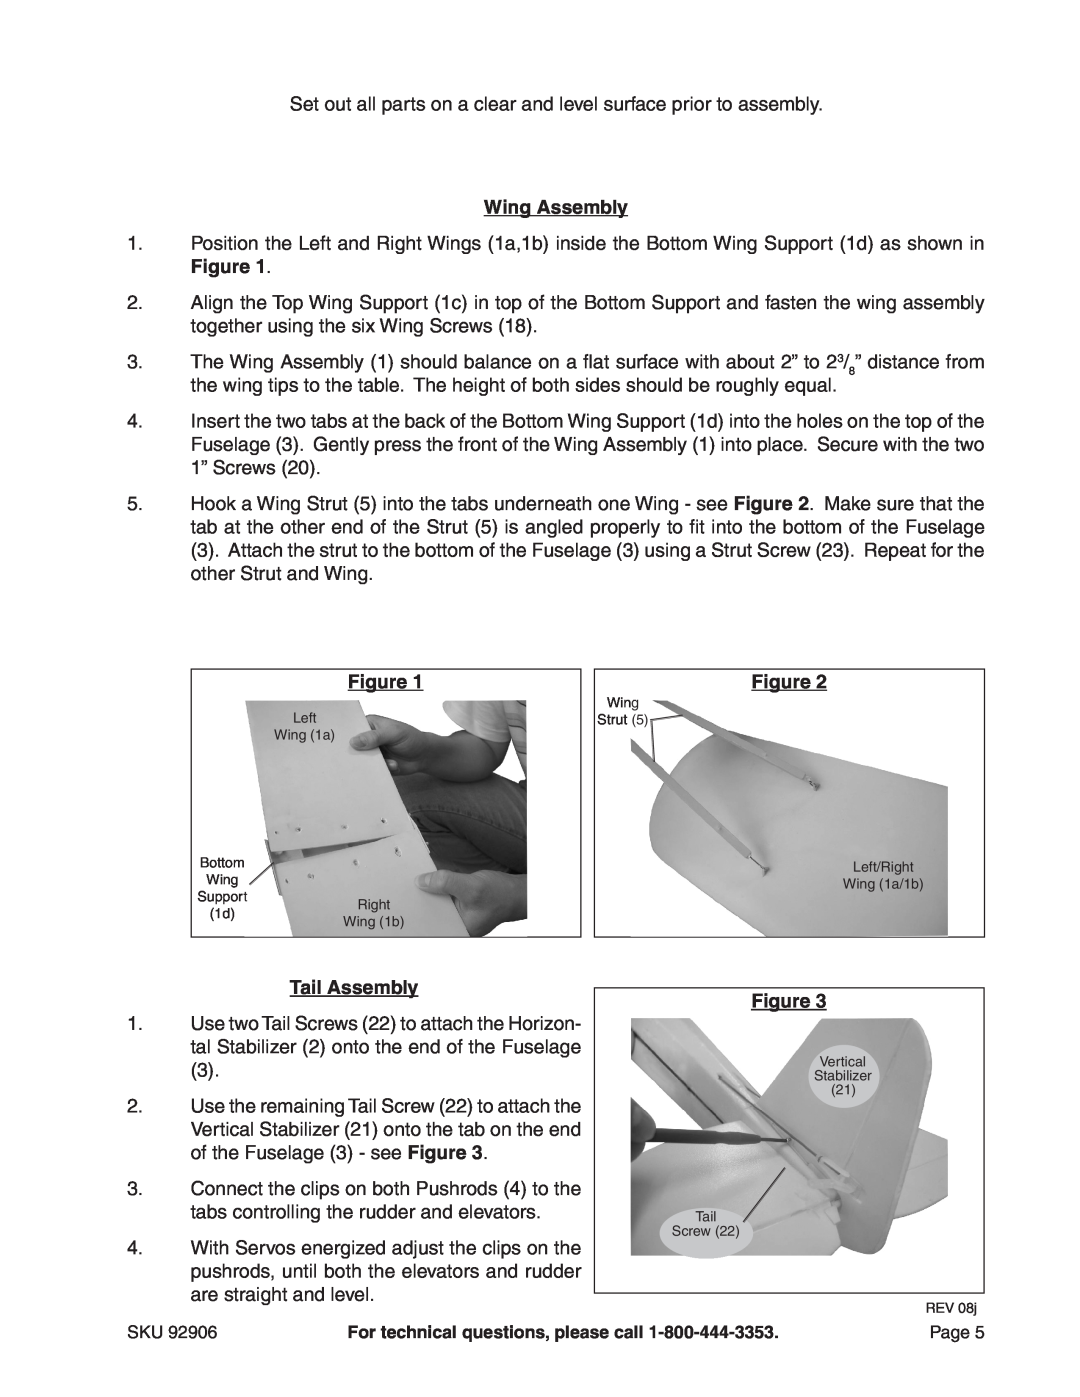 Harbor Freight Tools 92906 operating instructions Wing Assembly, Tail Assembly 